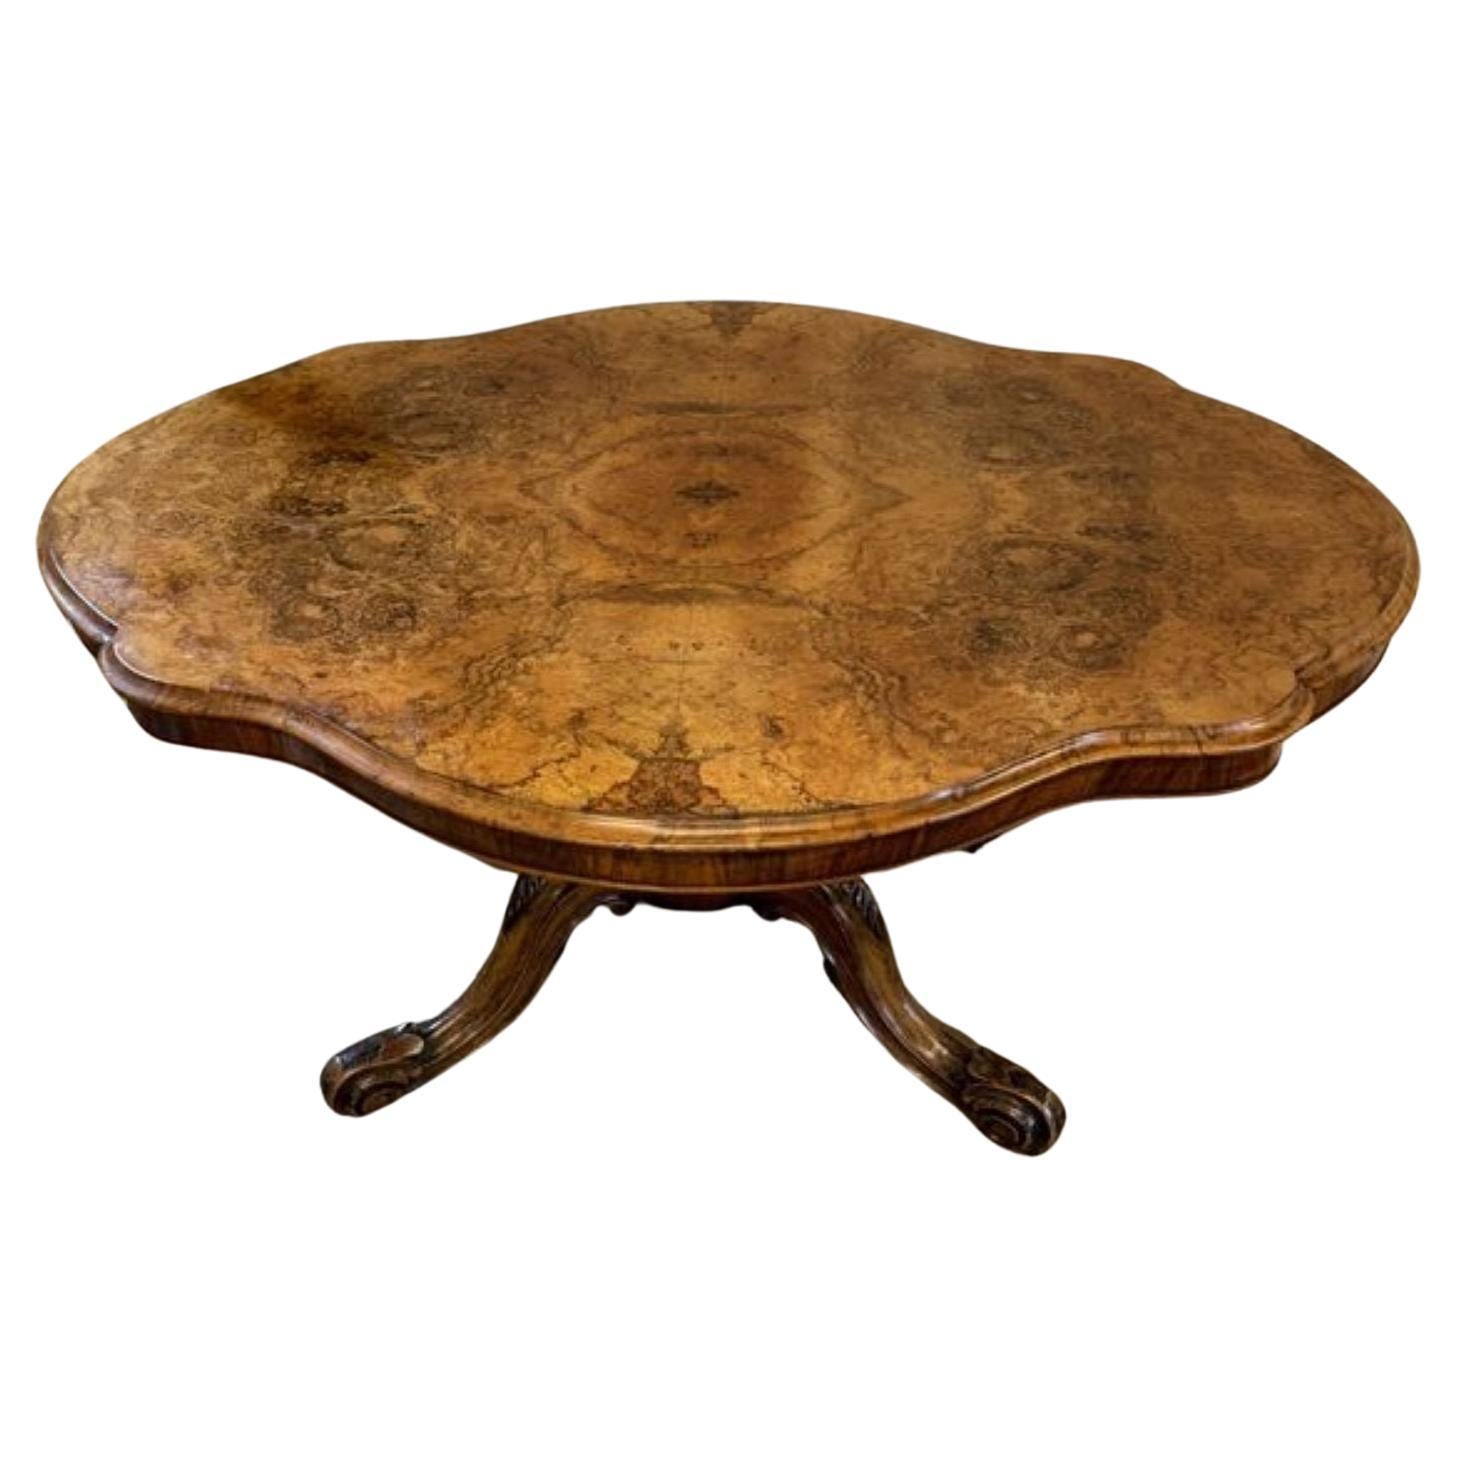 Stunning quality antique Victorian quality burr walnut dining table 